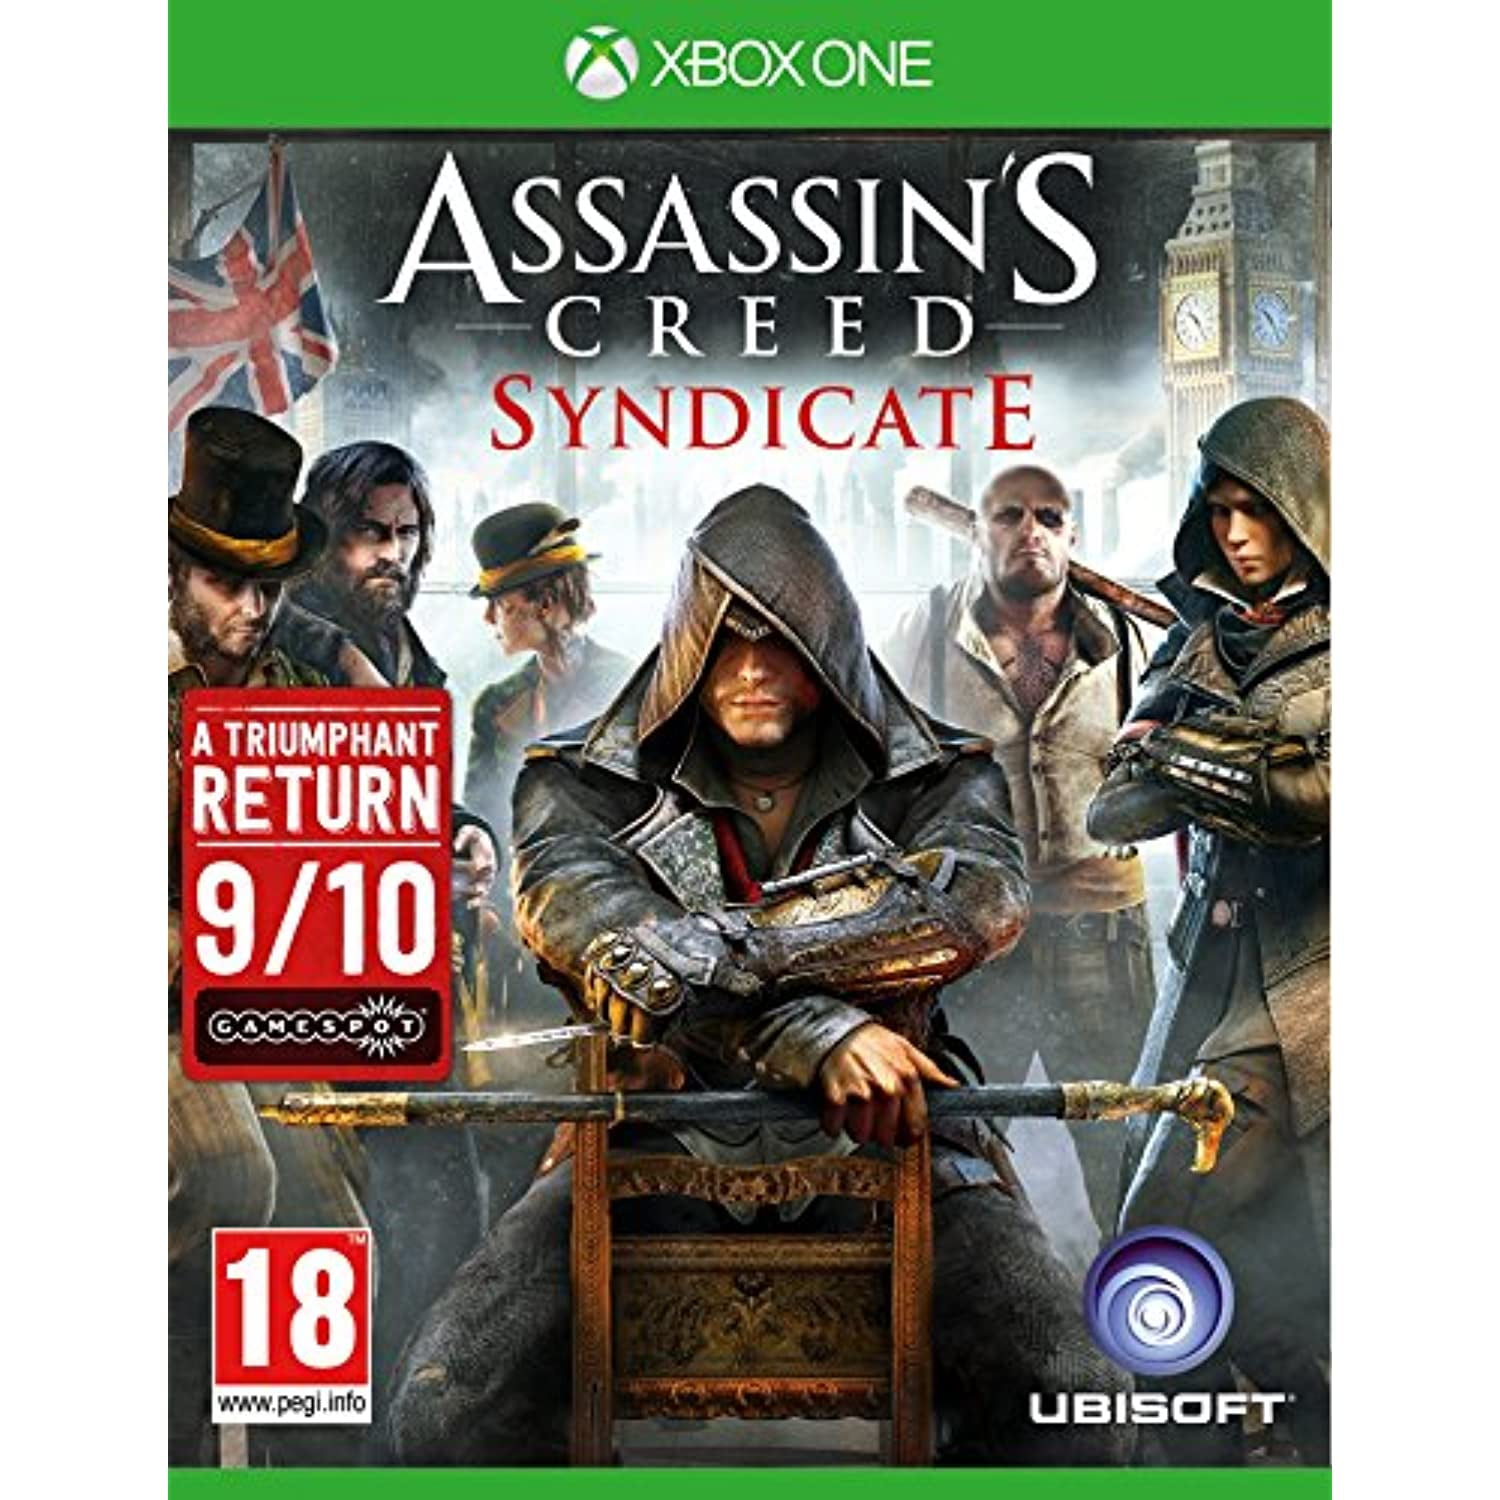 Assassin's creed xbox one